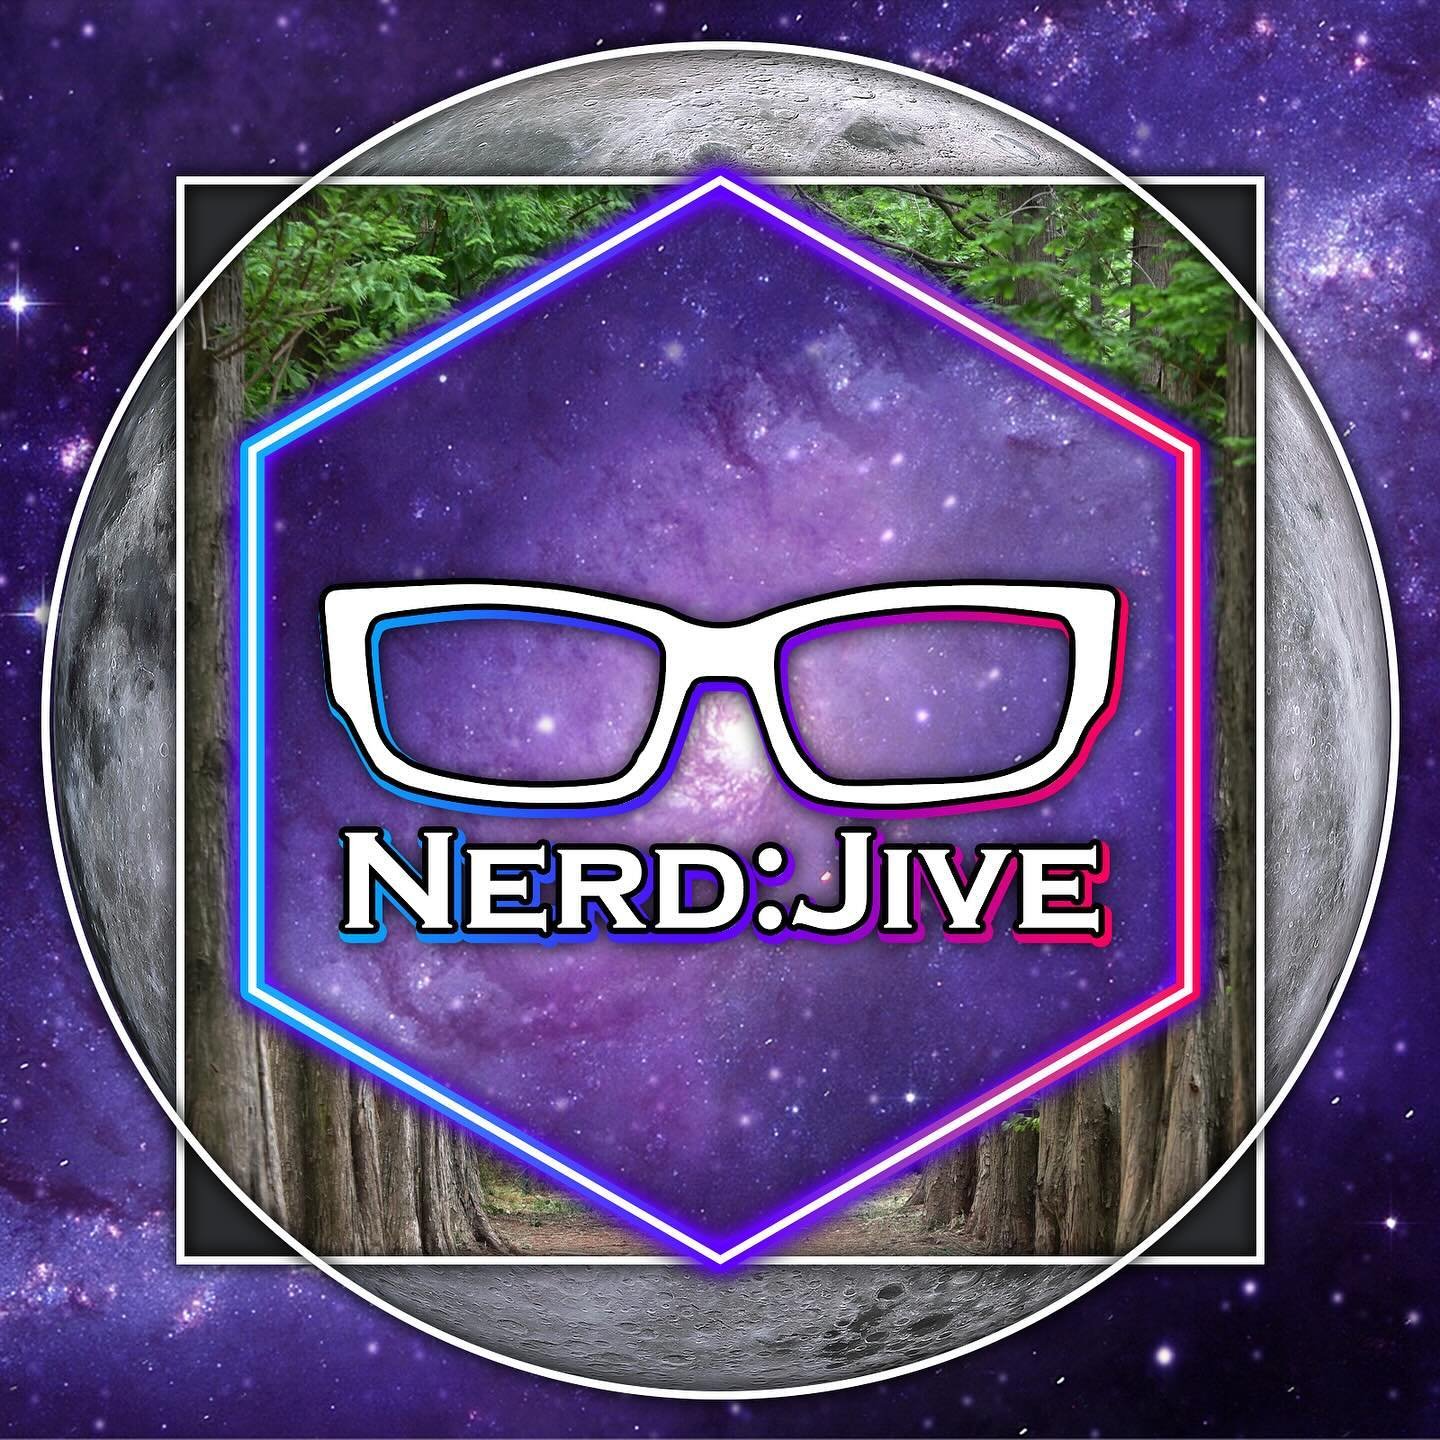 New logo and banner to match the shop update. If you haven&rsquo;t seen it yet check out @shopnorgrove &hellip; and look for Nerd:Jive on YouTube!!!
🌛🔥🌜
#newlogo #nerdjive #norgrove #newprofilepic #youtuber